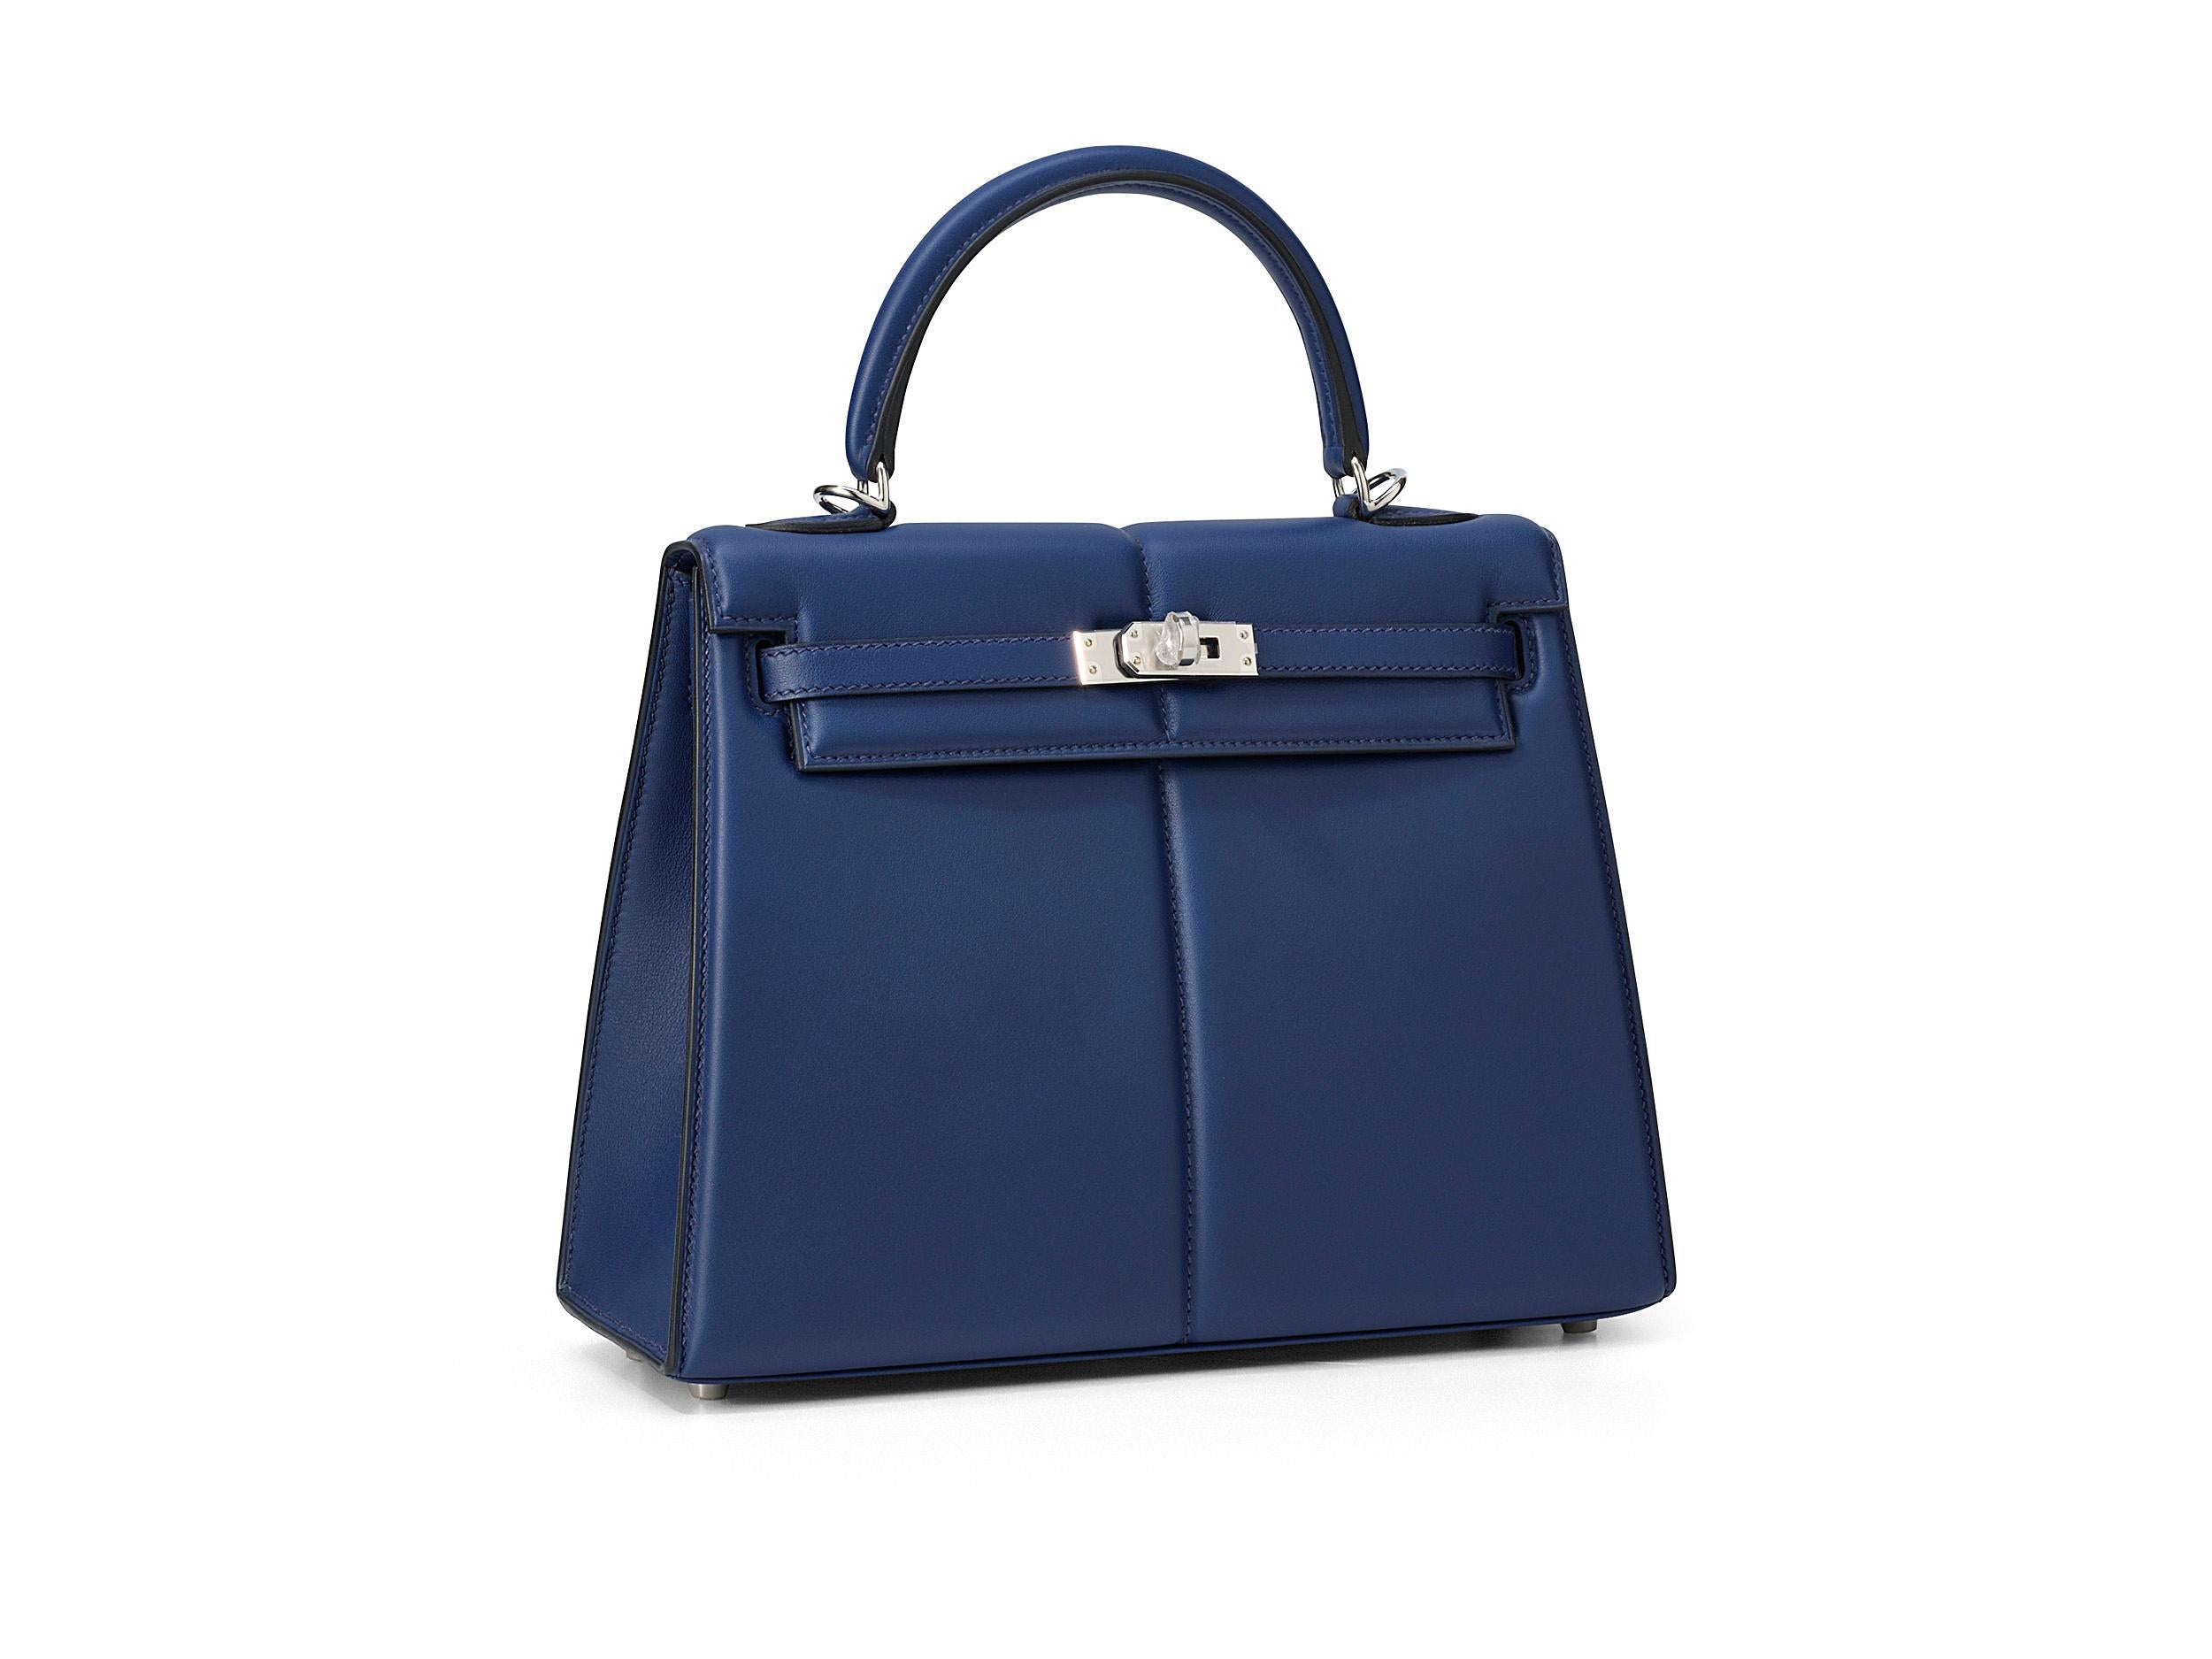 Hermès Kelly Padded 25 in bleu saphire and swift leather with palladium hardware. The bag is unworn and comes as full set including the original receipt.

Stamp Z (2021) 

